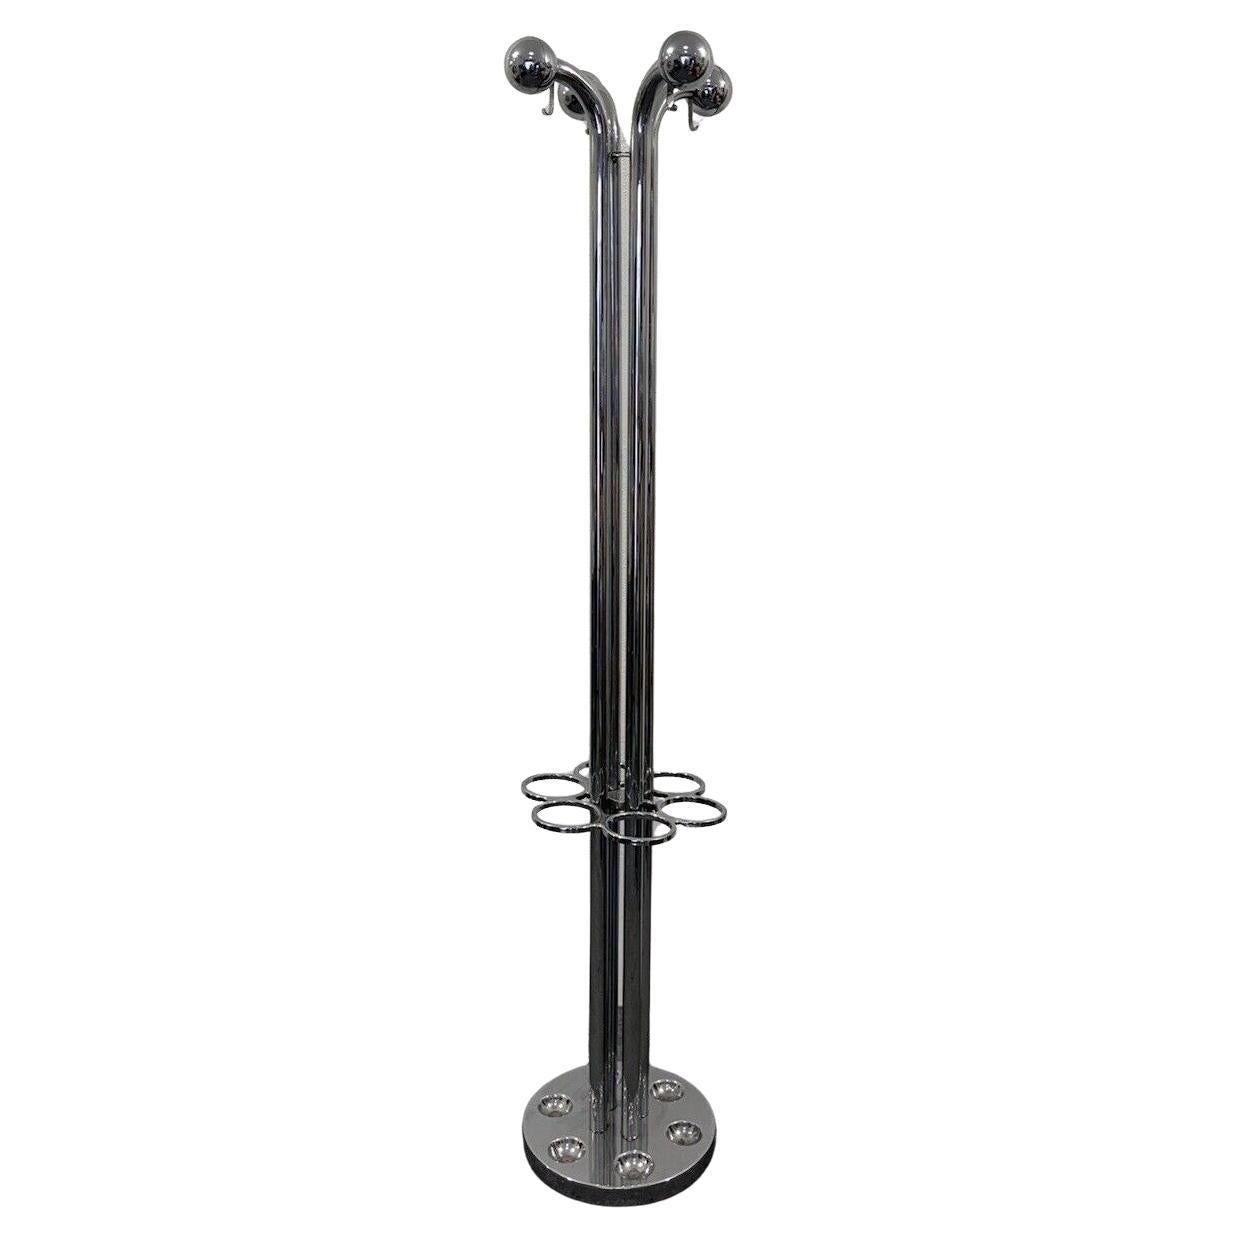 Coat Stand Space Age Design Steel Modernism 1970's